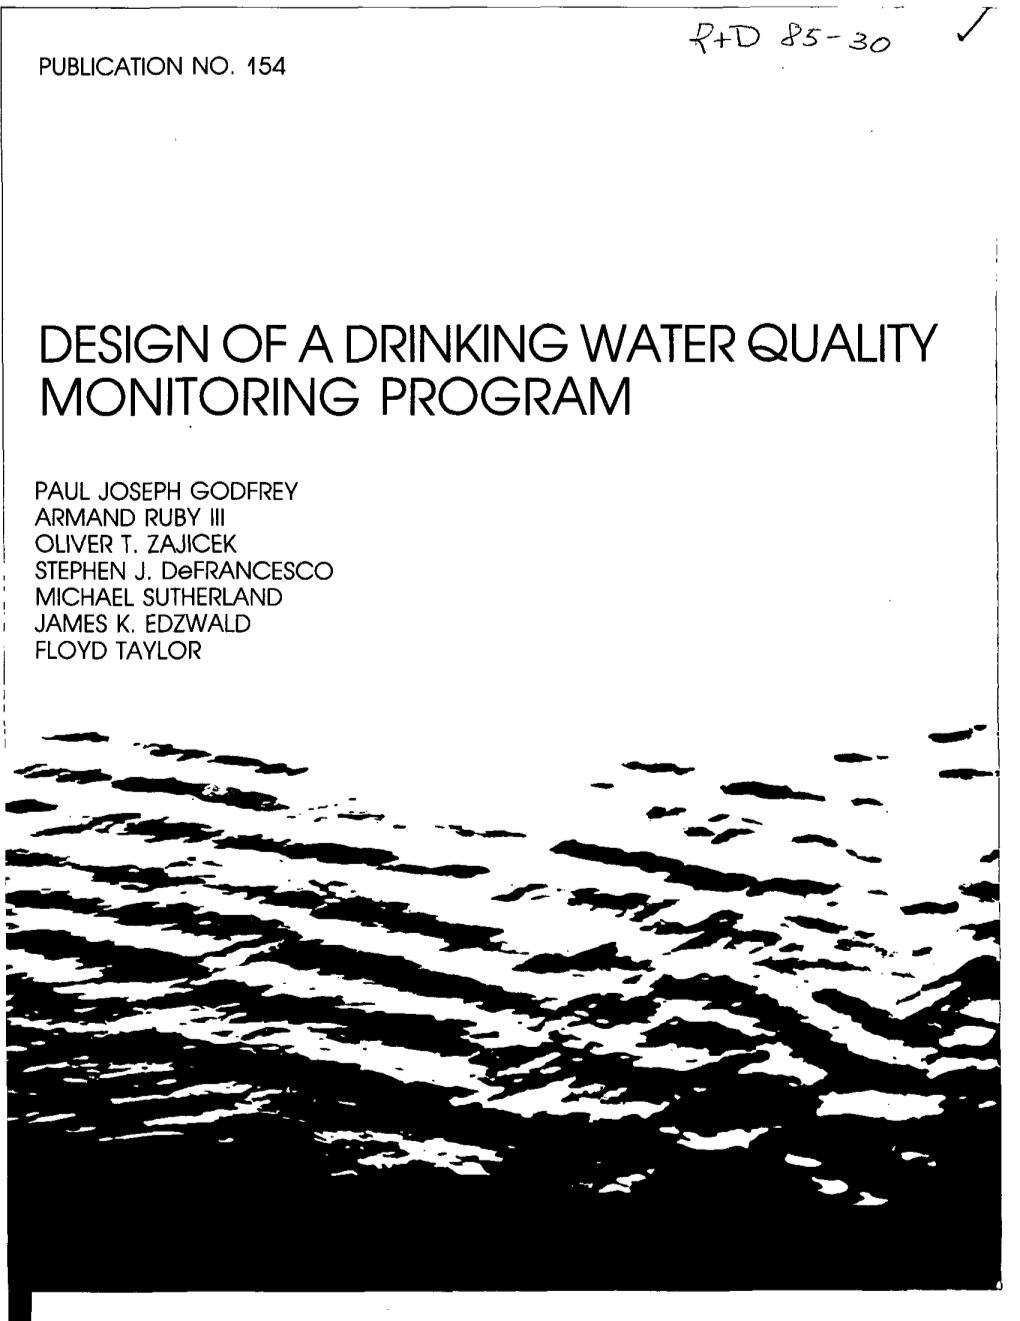 Design of a Drinking Water Quality Monitoring Program